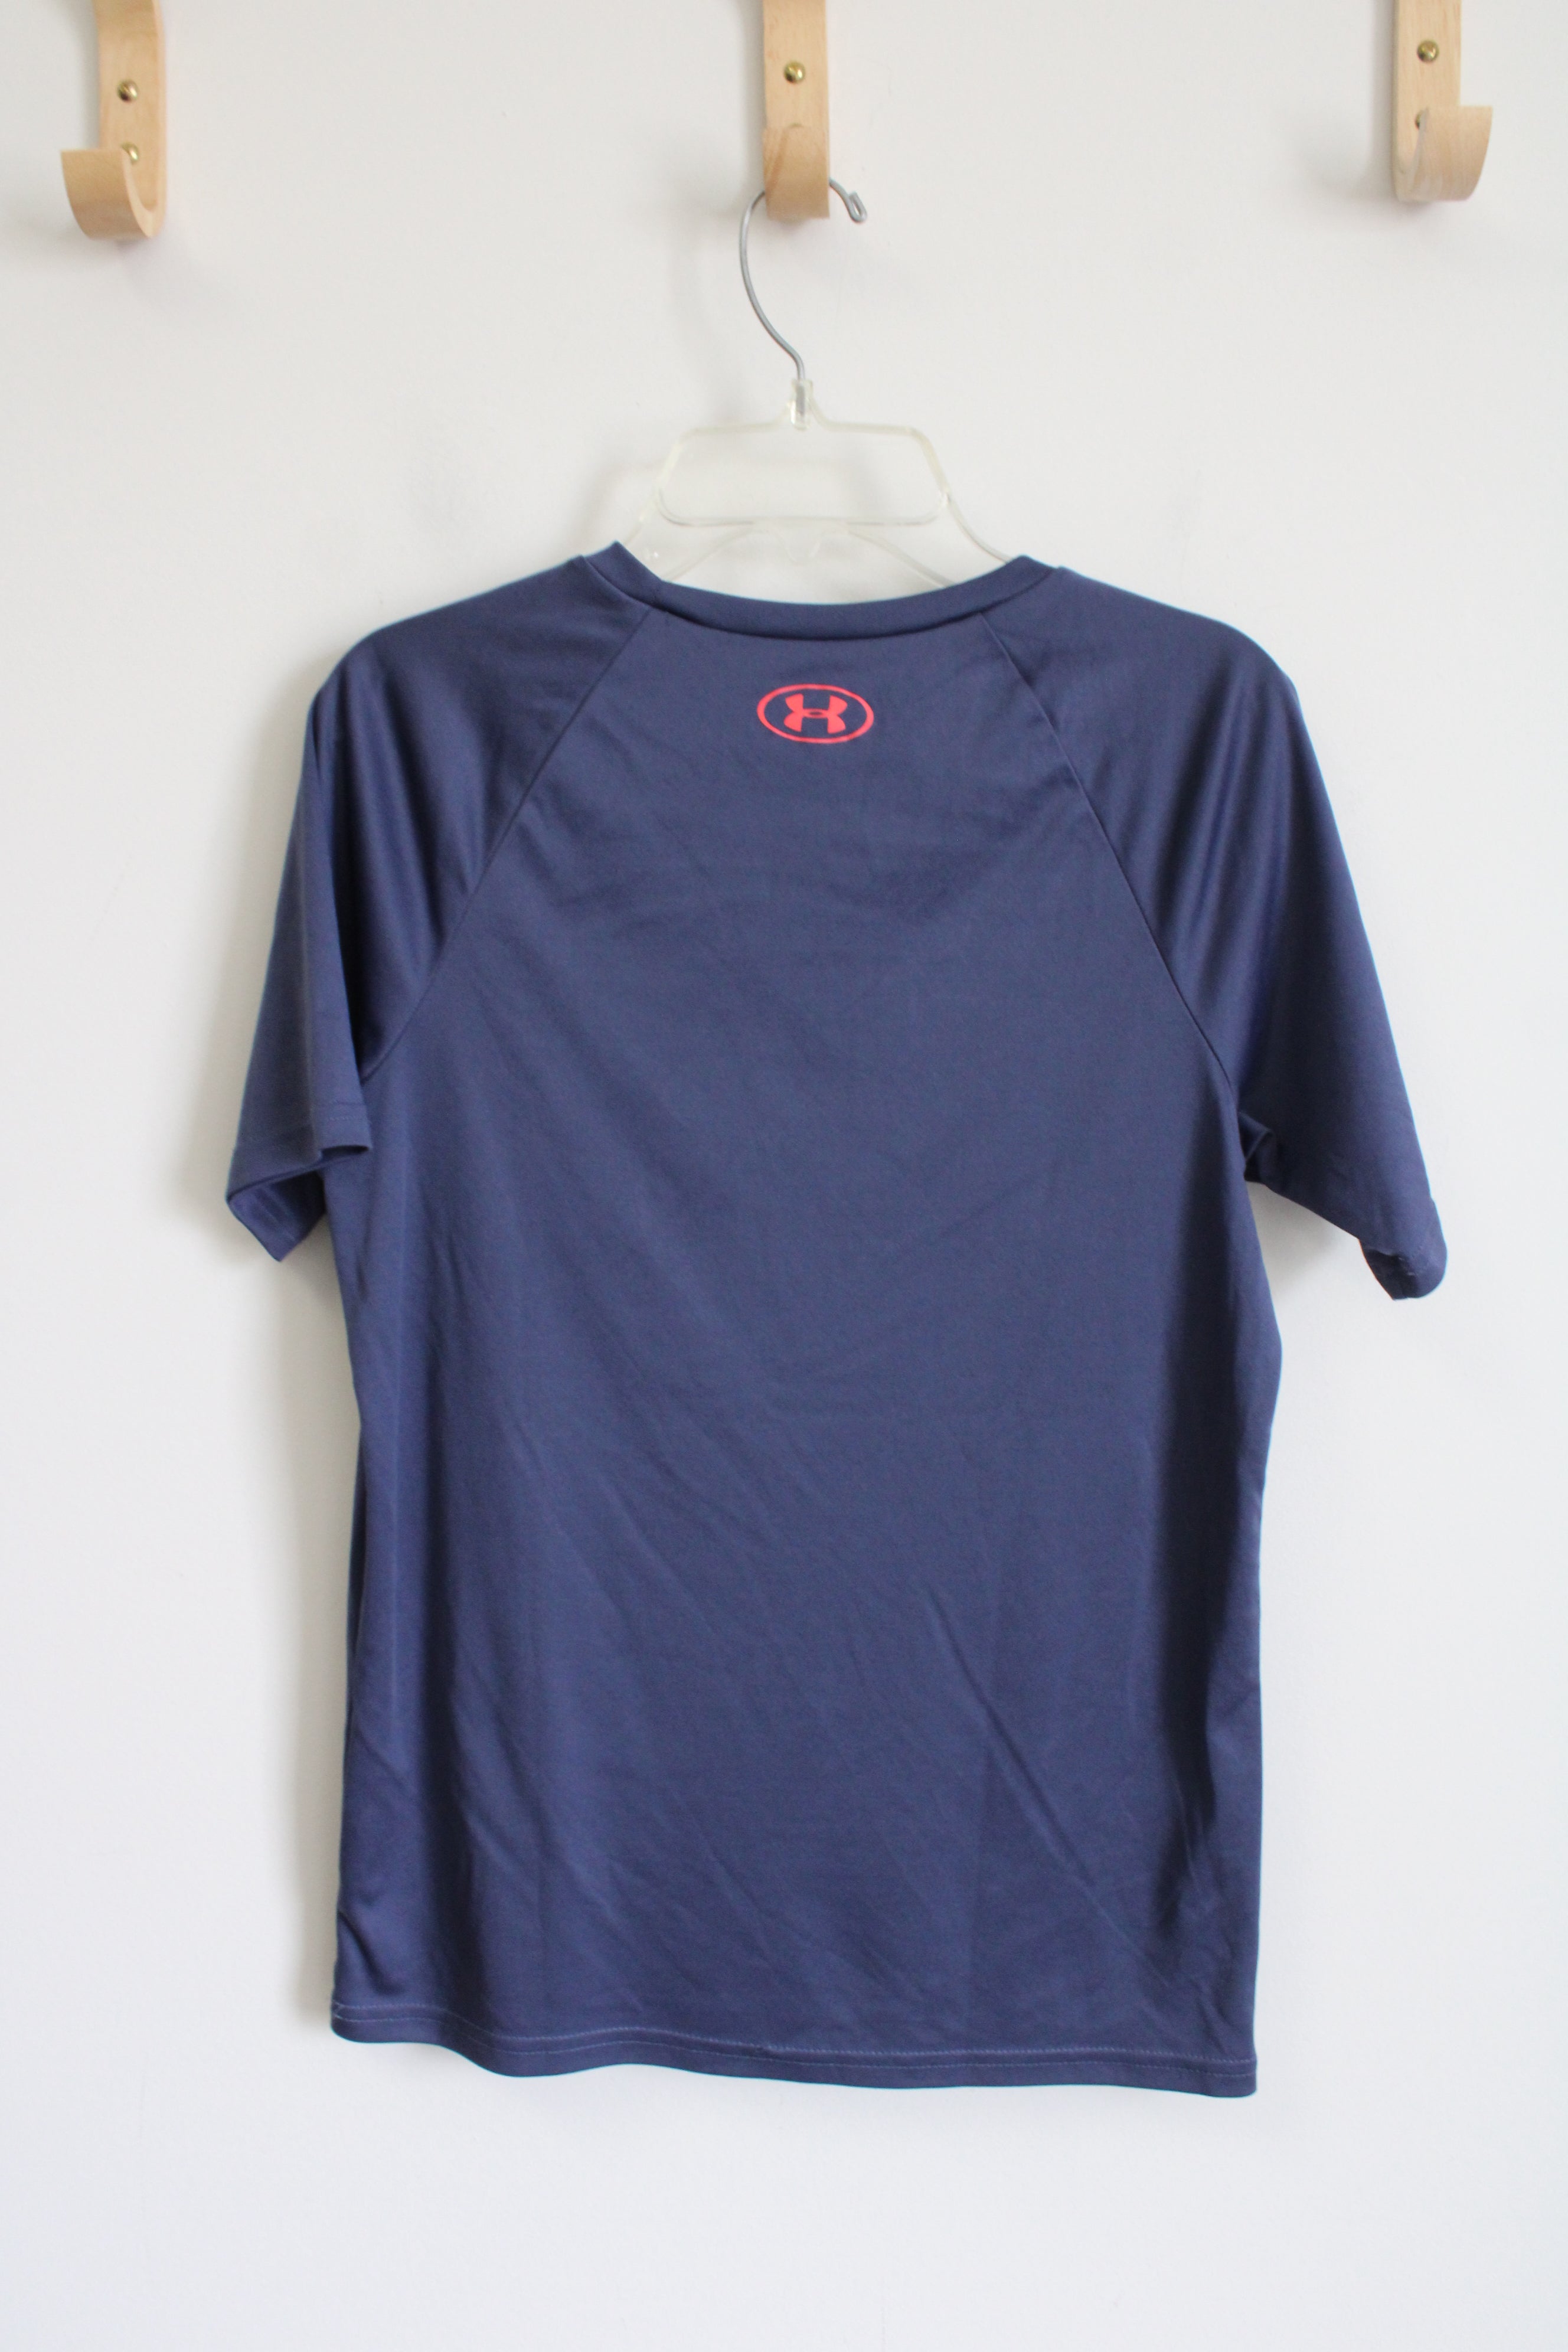 Under Armour Gray Blue Logo Shirt | Youth L (14/16)